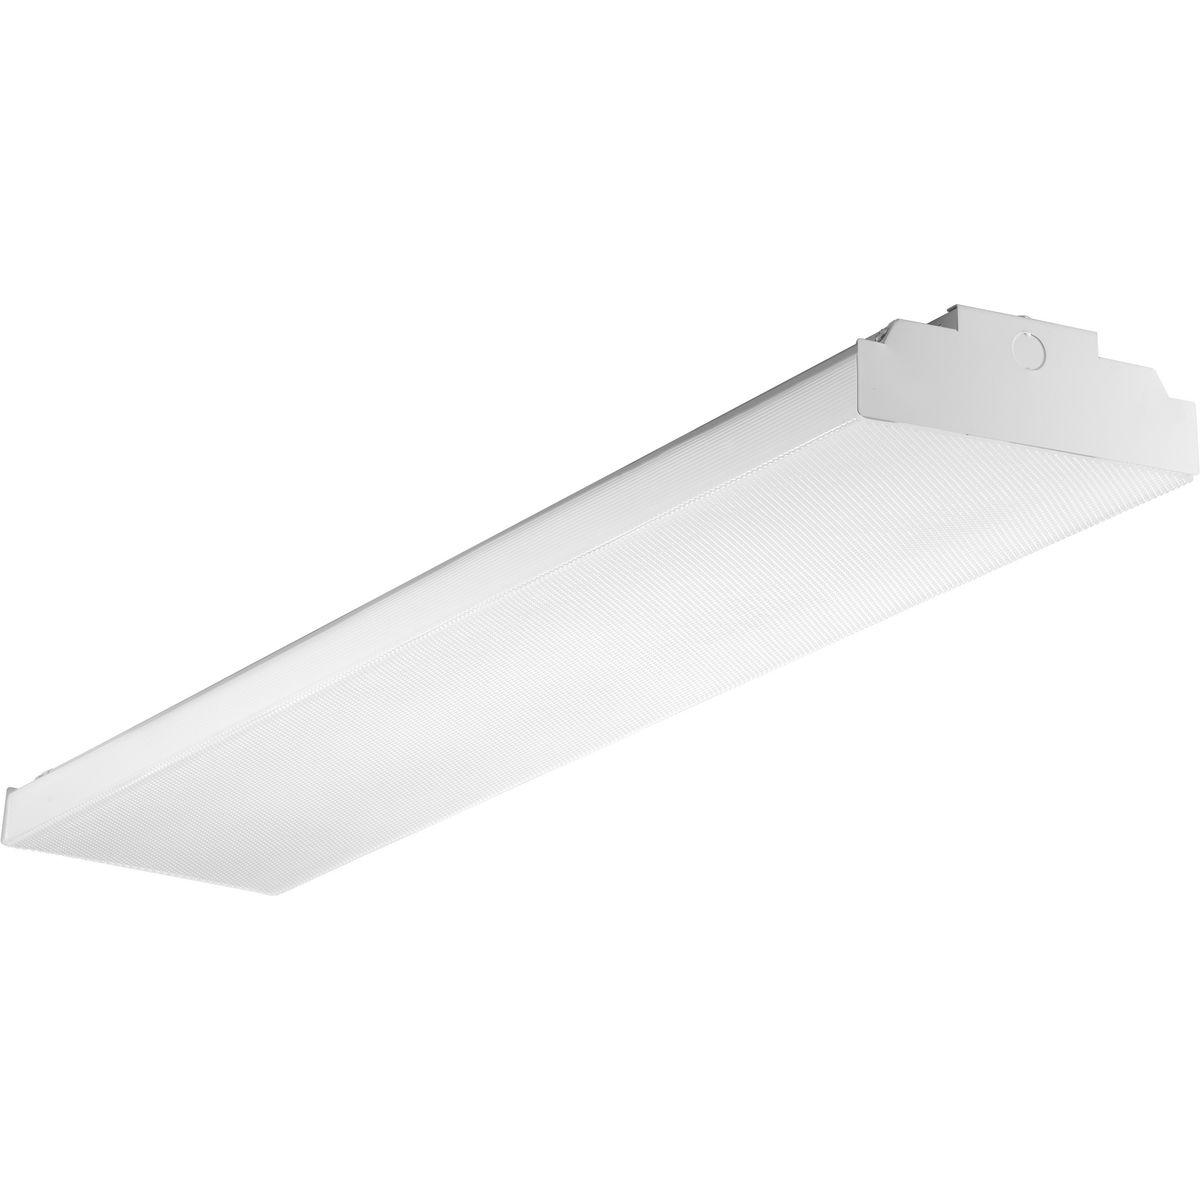 Hubbell PCIAW-LED-4-35K PCIAW is a 4FT LED Wraparound with frosted acrylic lens. This product is surface mounted to the ceiling with fully assembled for quick installation. DesignLights Consortium (DLC) qualified.  ; Long Life 50,000 hour LEDs for reduced maintenance ; Heavy gau